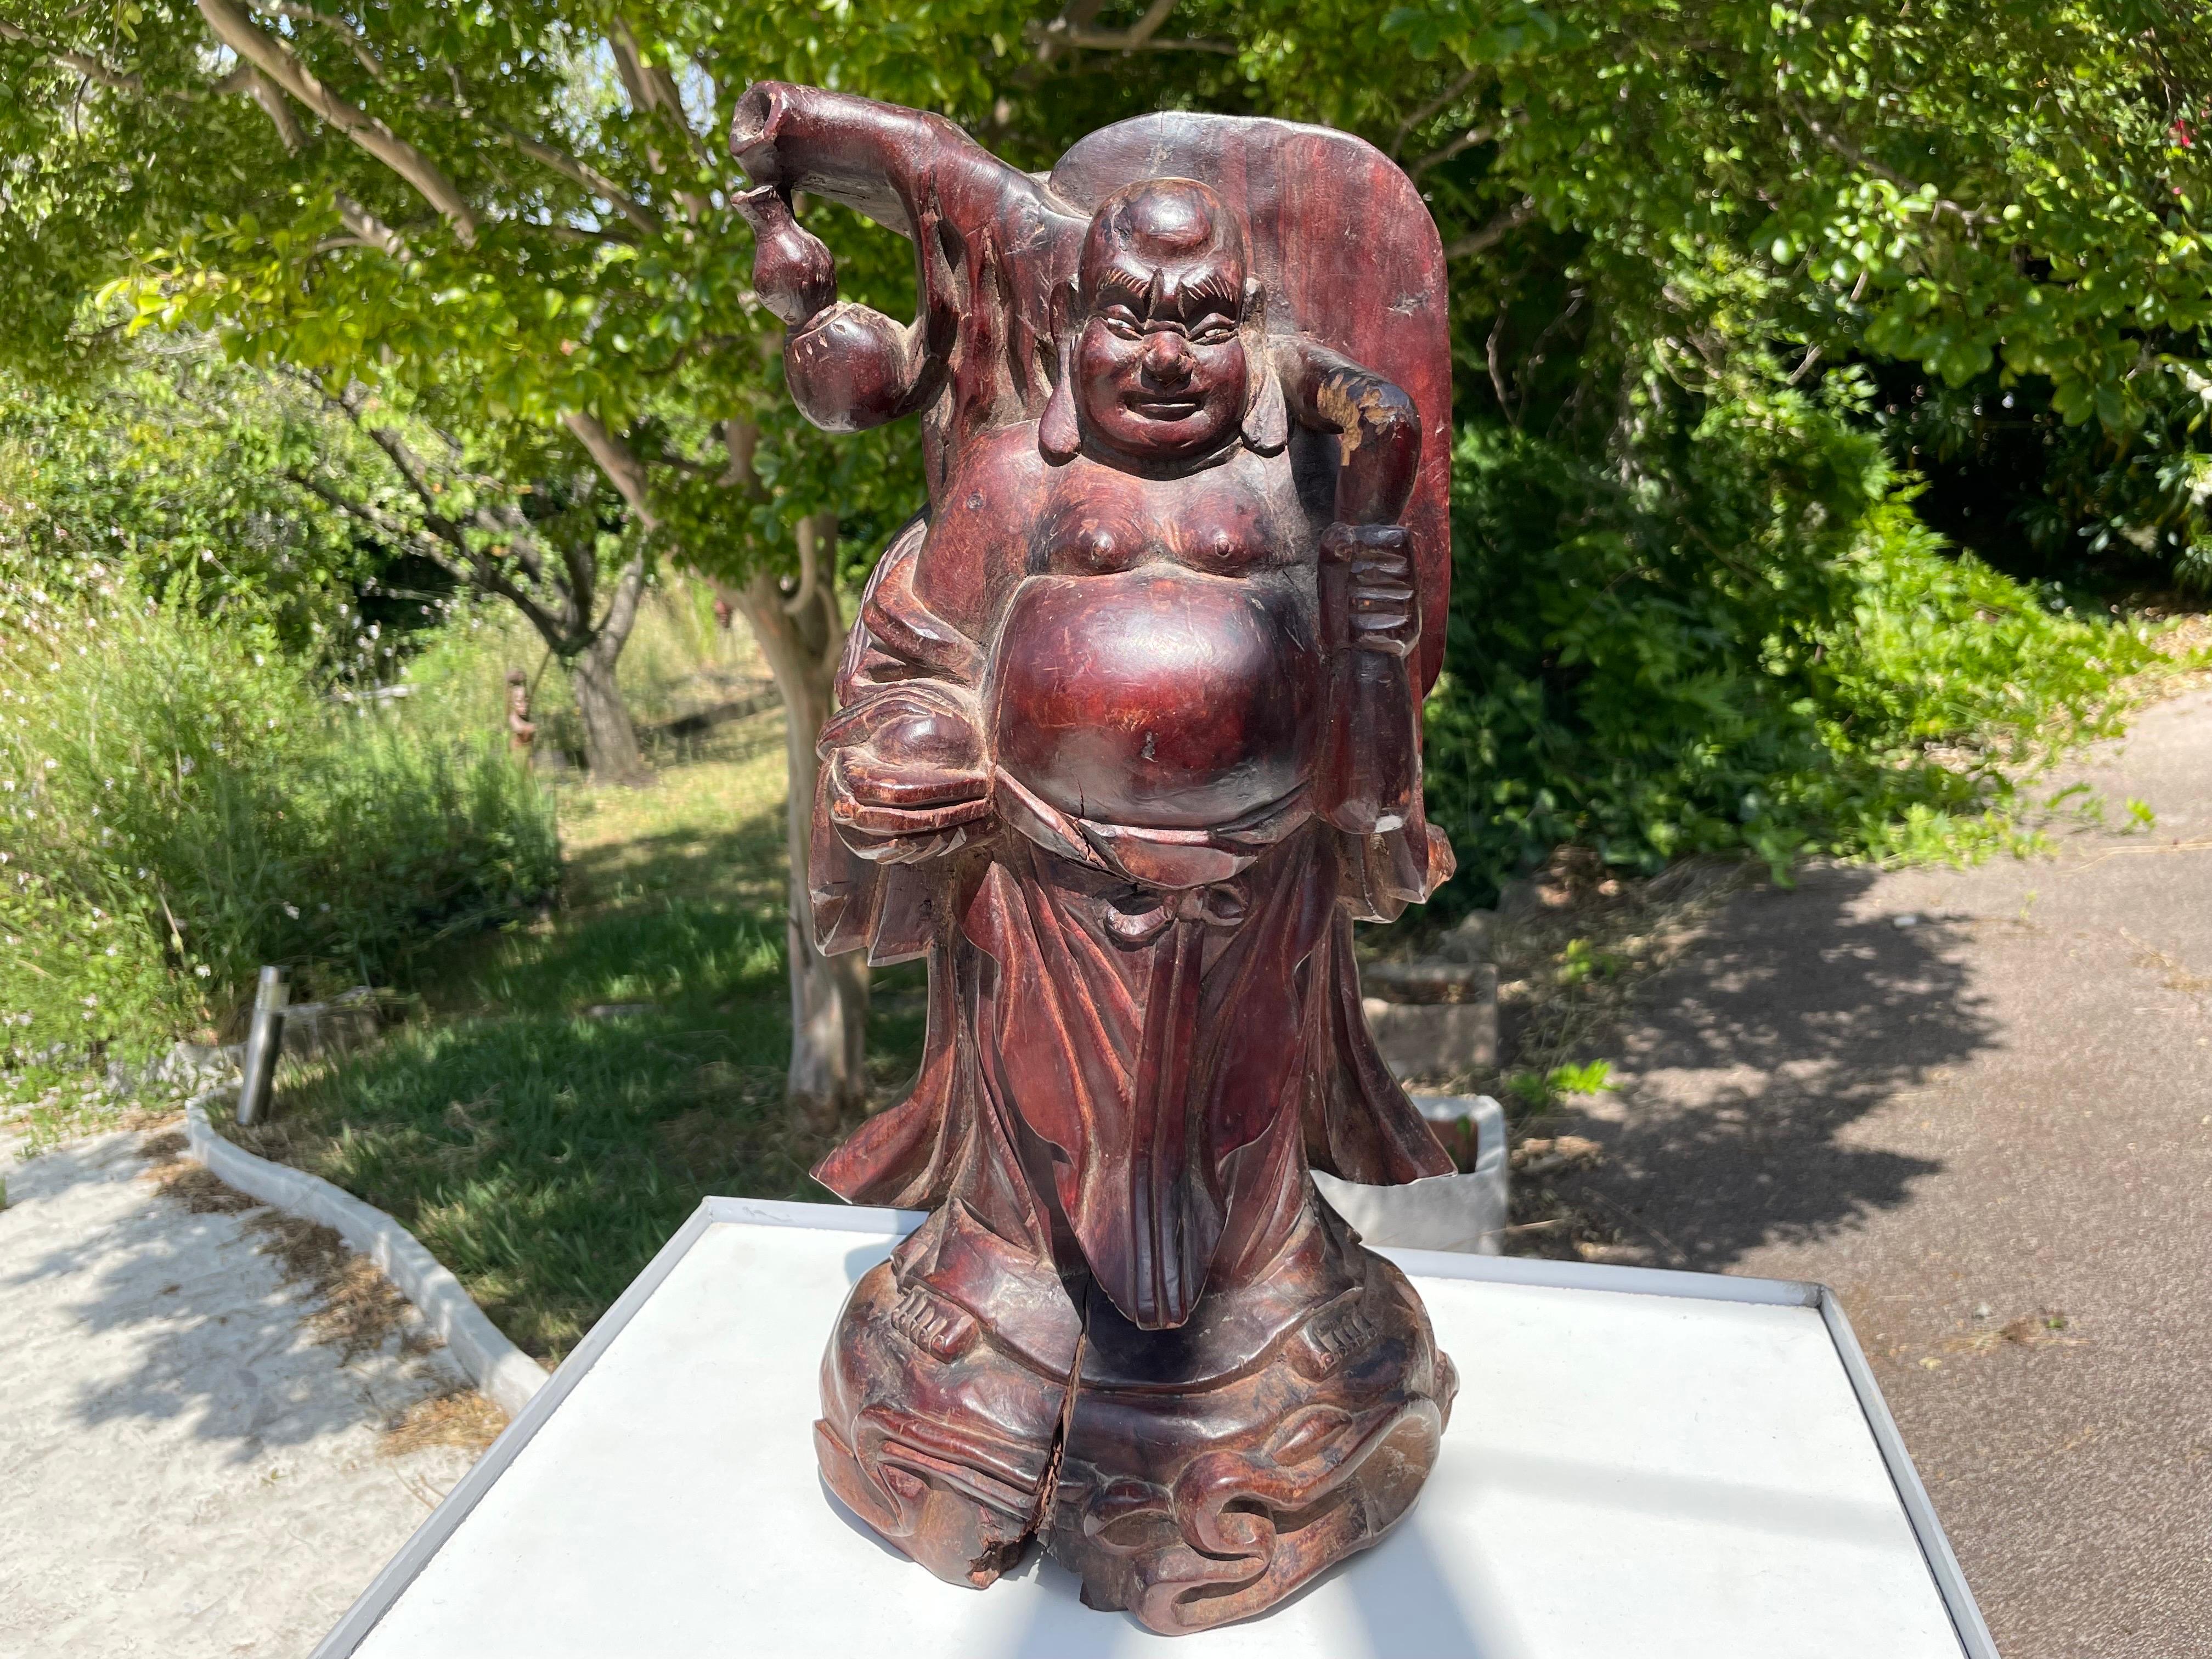 We have a very nice wooden Buddha sculpture. It dates from the early 20th century, and you can see the aging in its beautiful patina. The work of sculpture is very precise and very flexible, it is a quality object. The sculpture is slightly split at